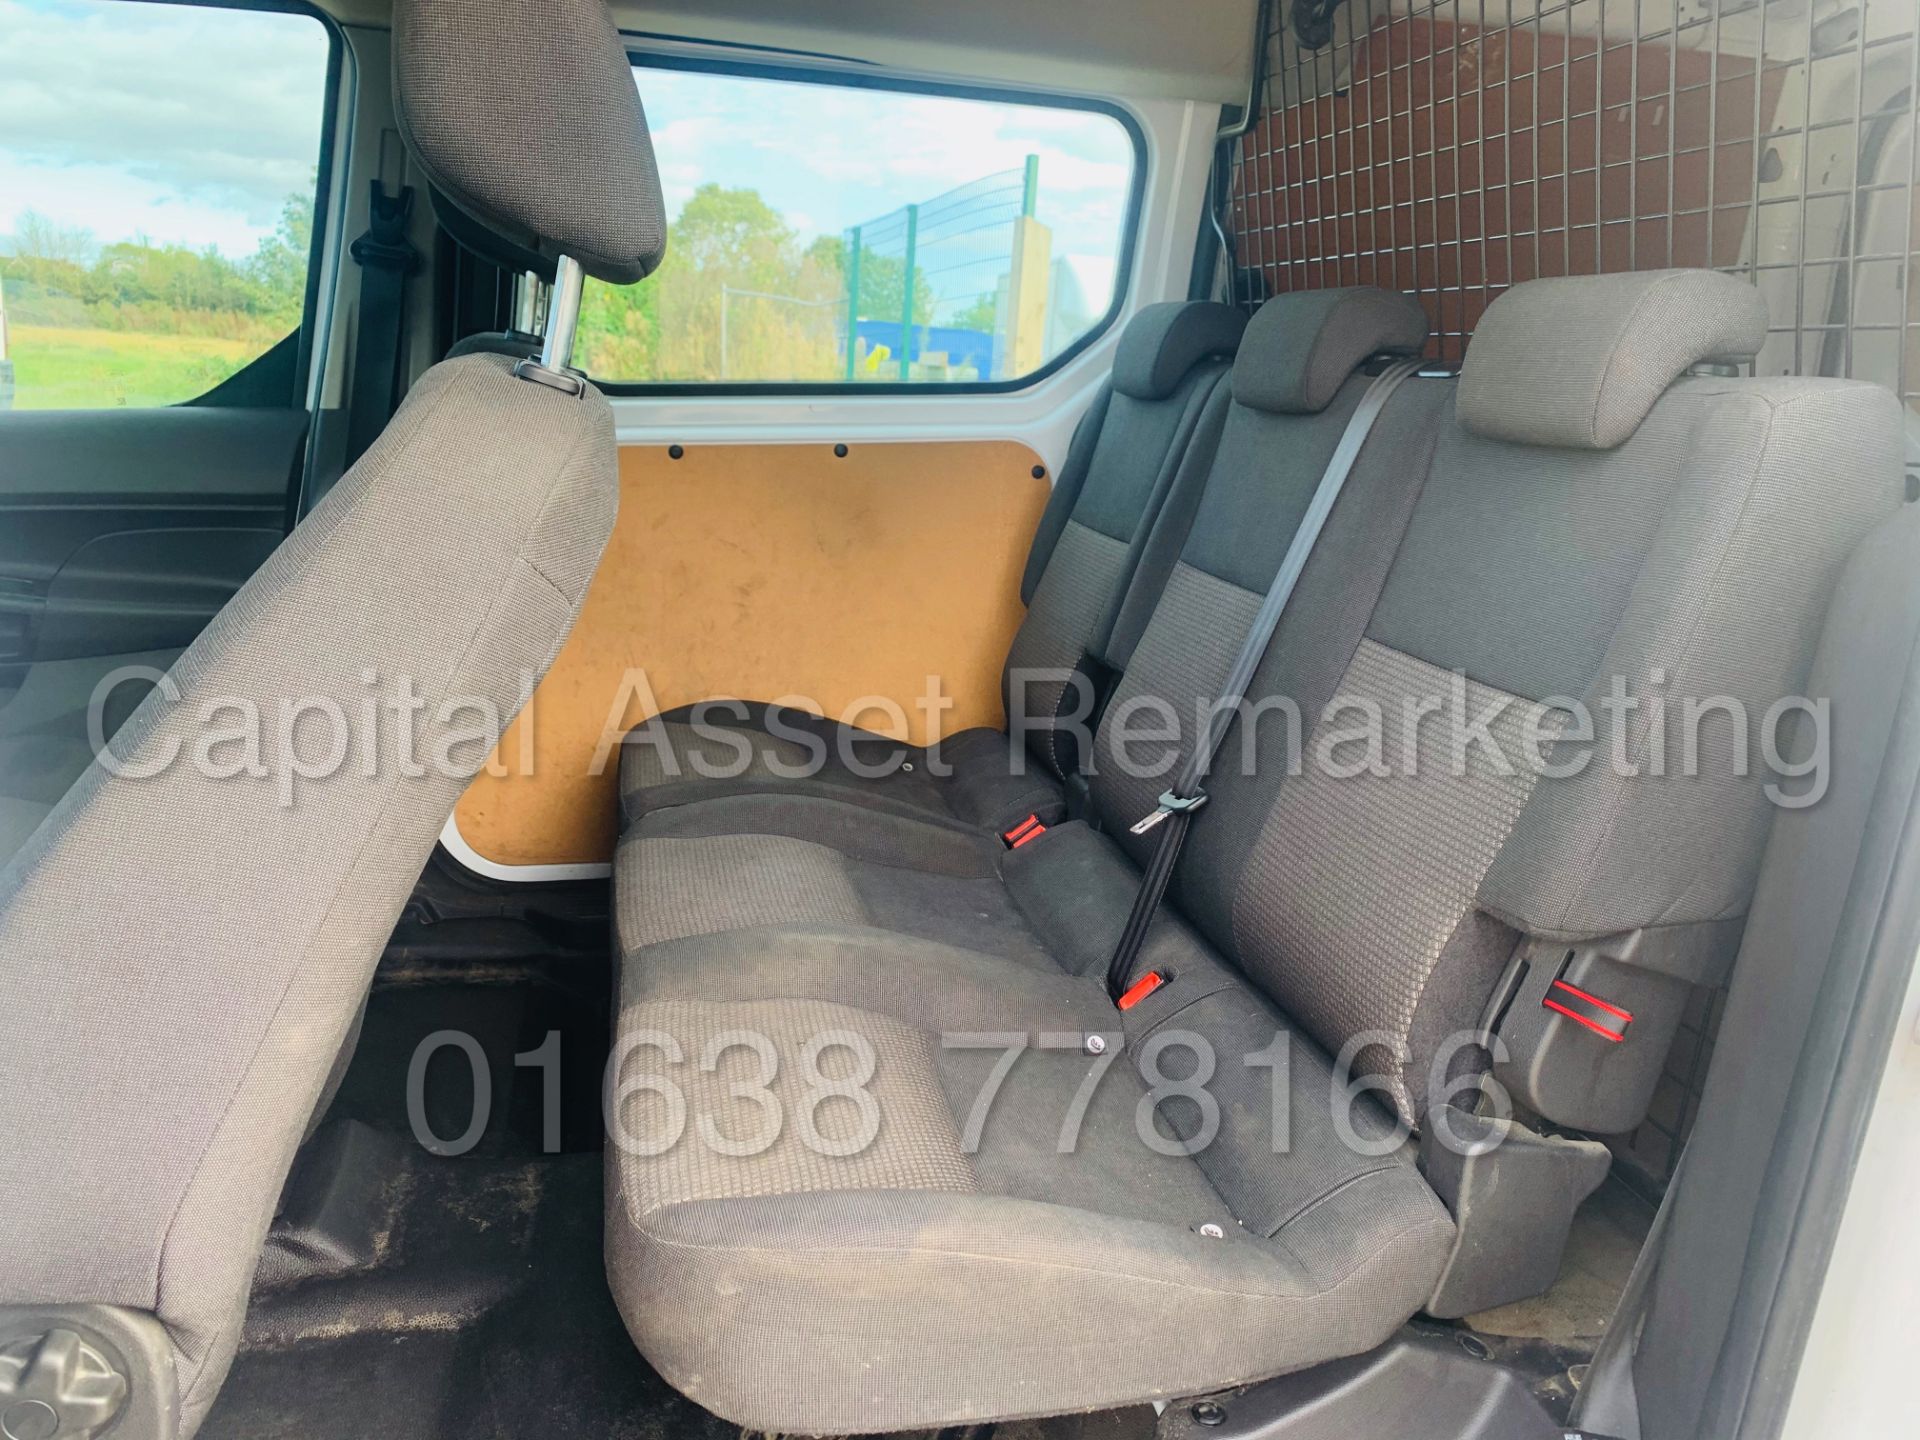 (ON SALE) FORD TRANSIT CONNECT *LWB - 5 SEATER CREW VAN* (2018 - EURO 6) 1.5 TDCI *A/C* (1 OWNER) - Image 22 of 40